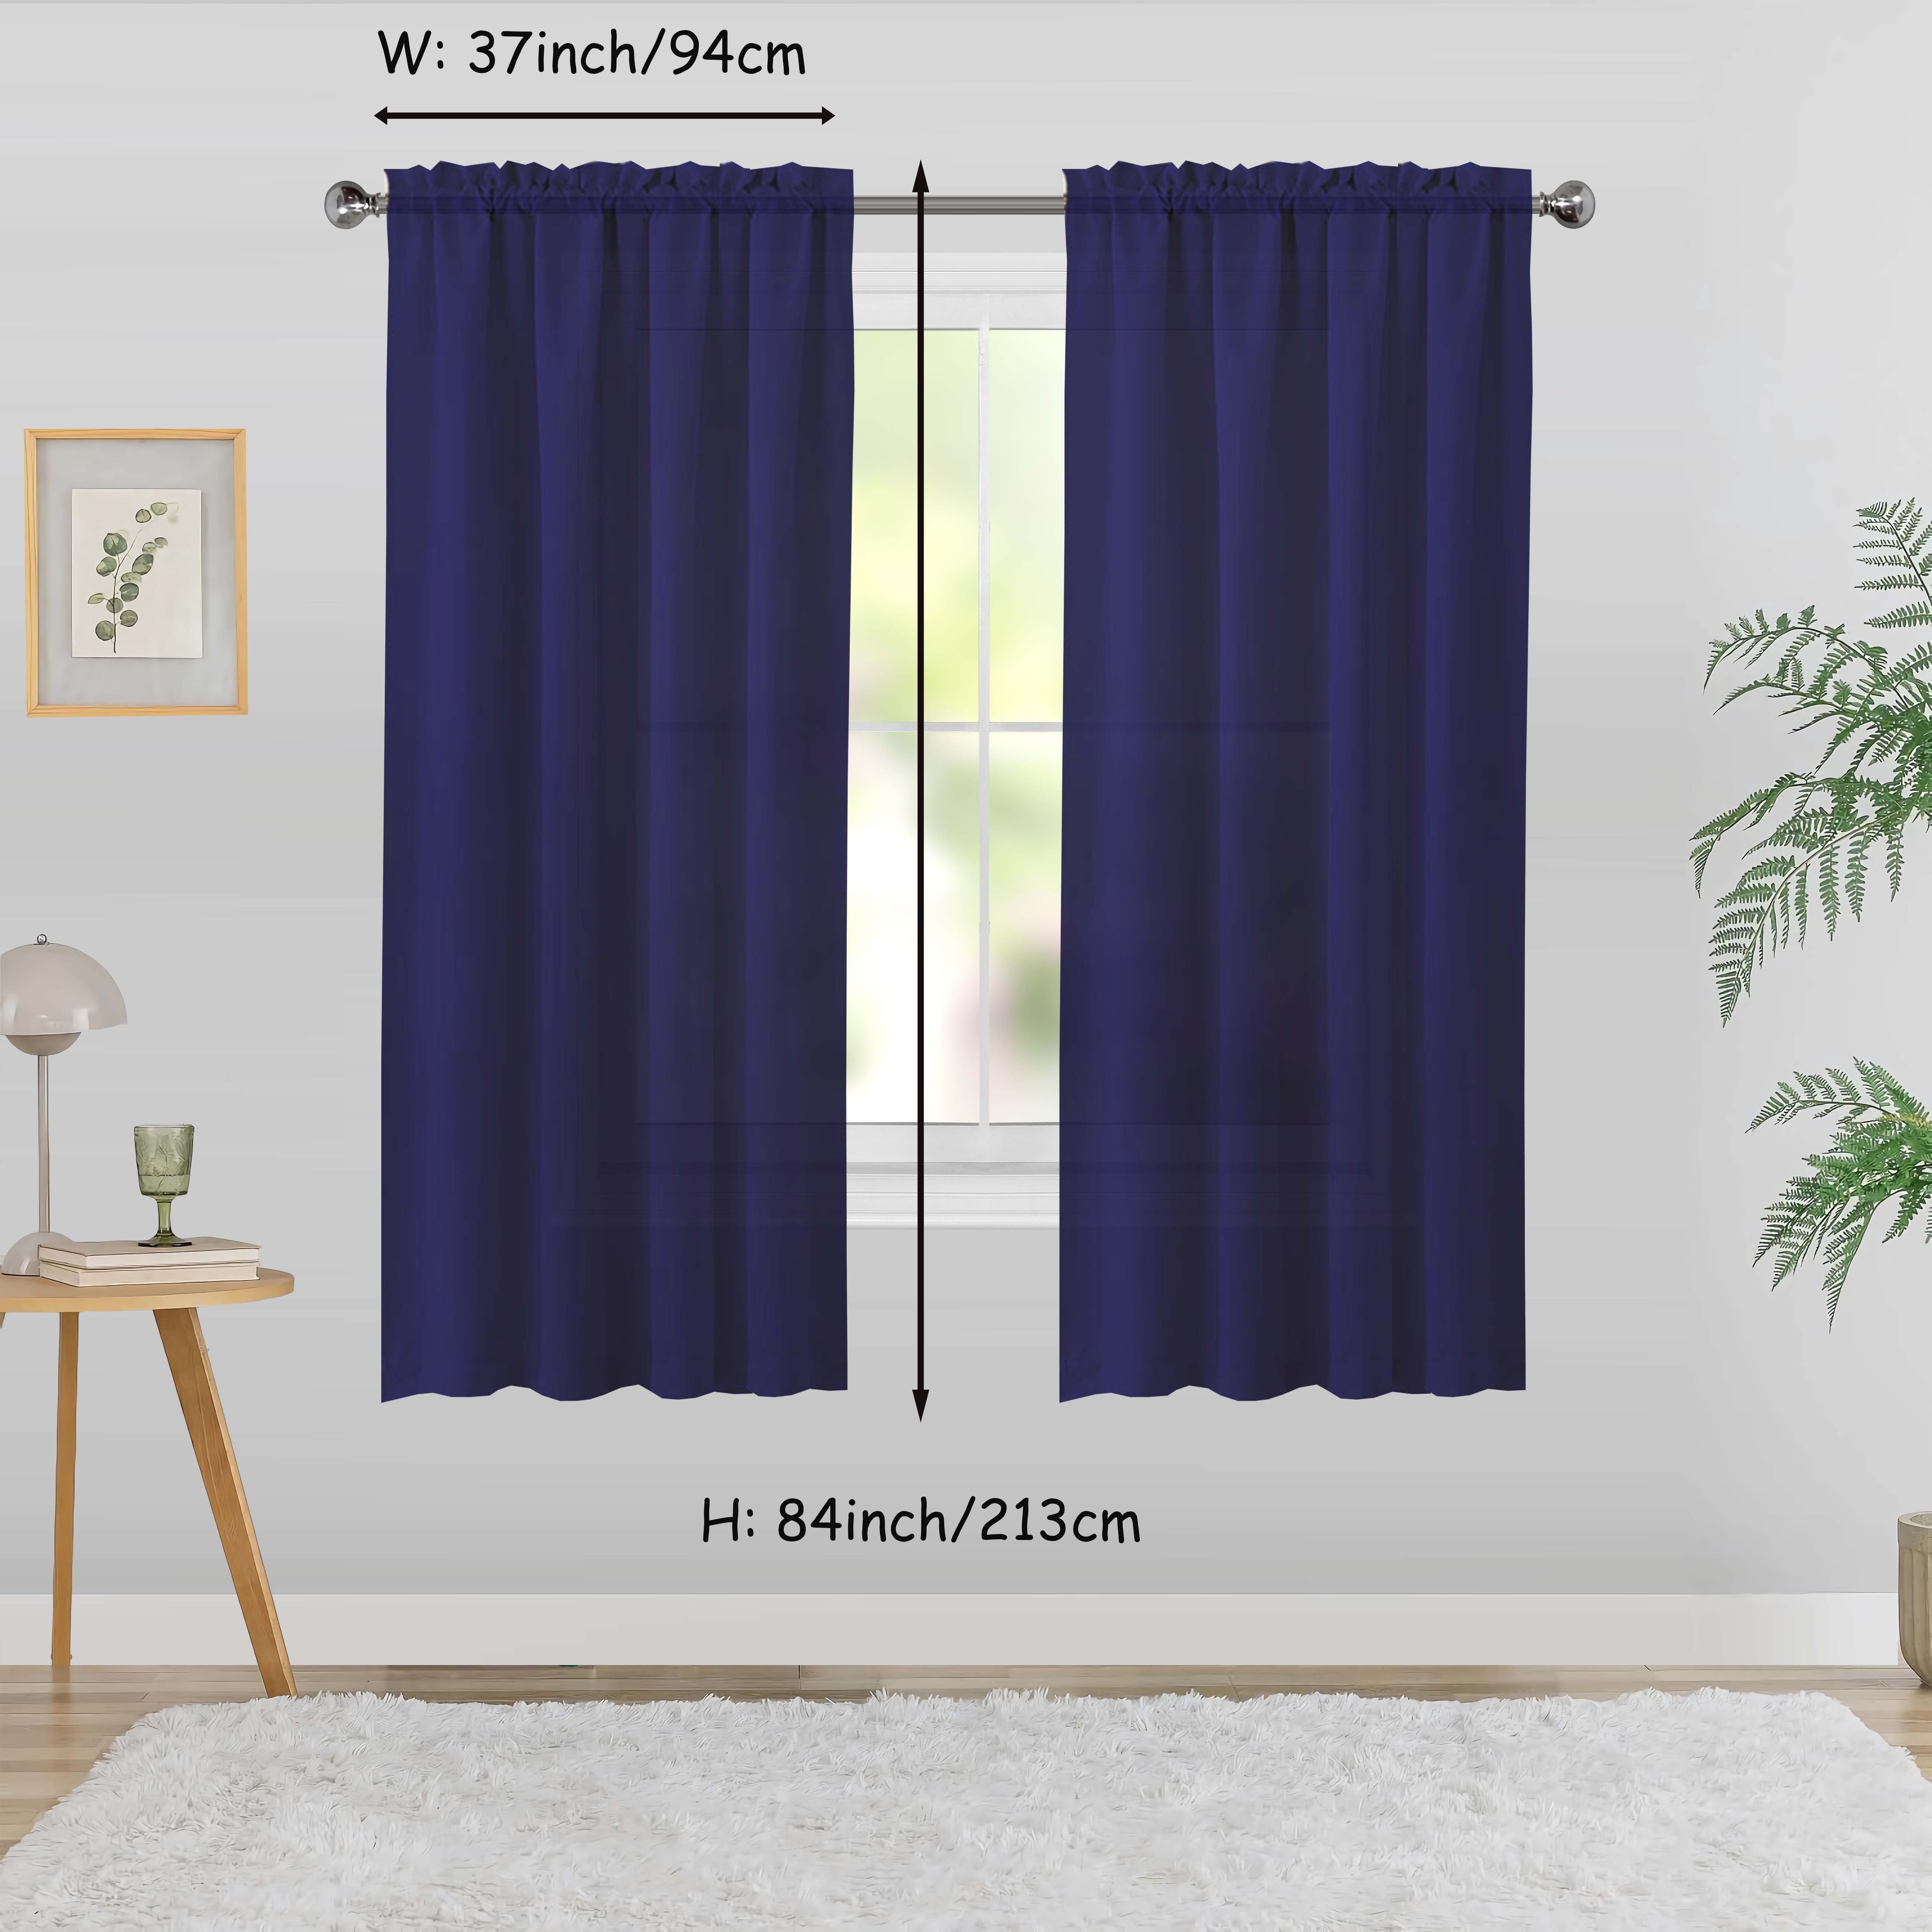 2pcs solid color light filtering curtains rod pocket window treatments curtain drapes suitable for living room bedroom office home decor